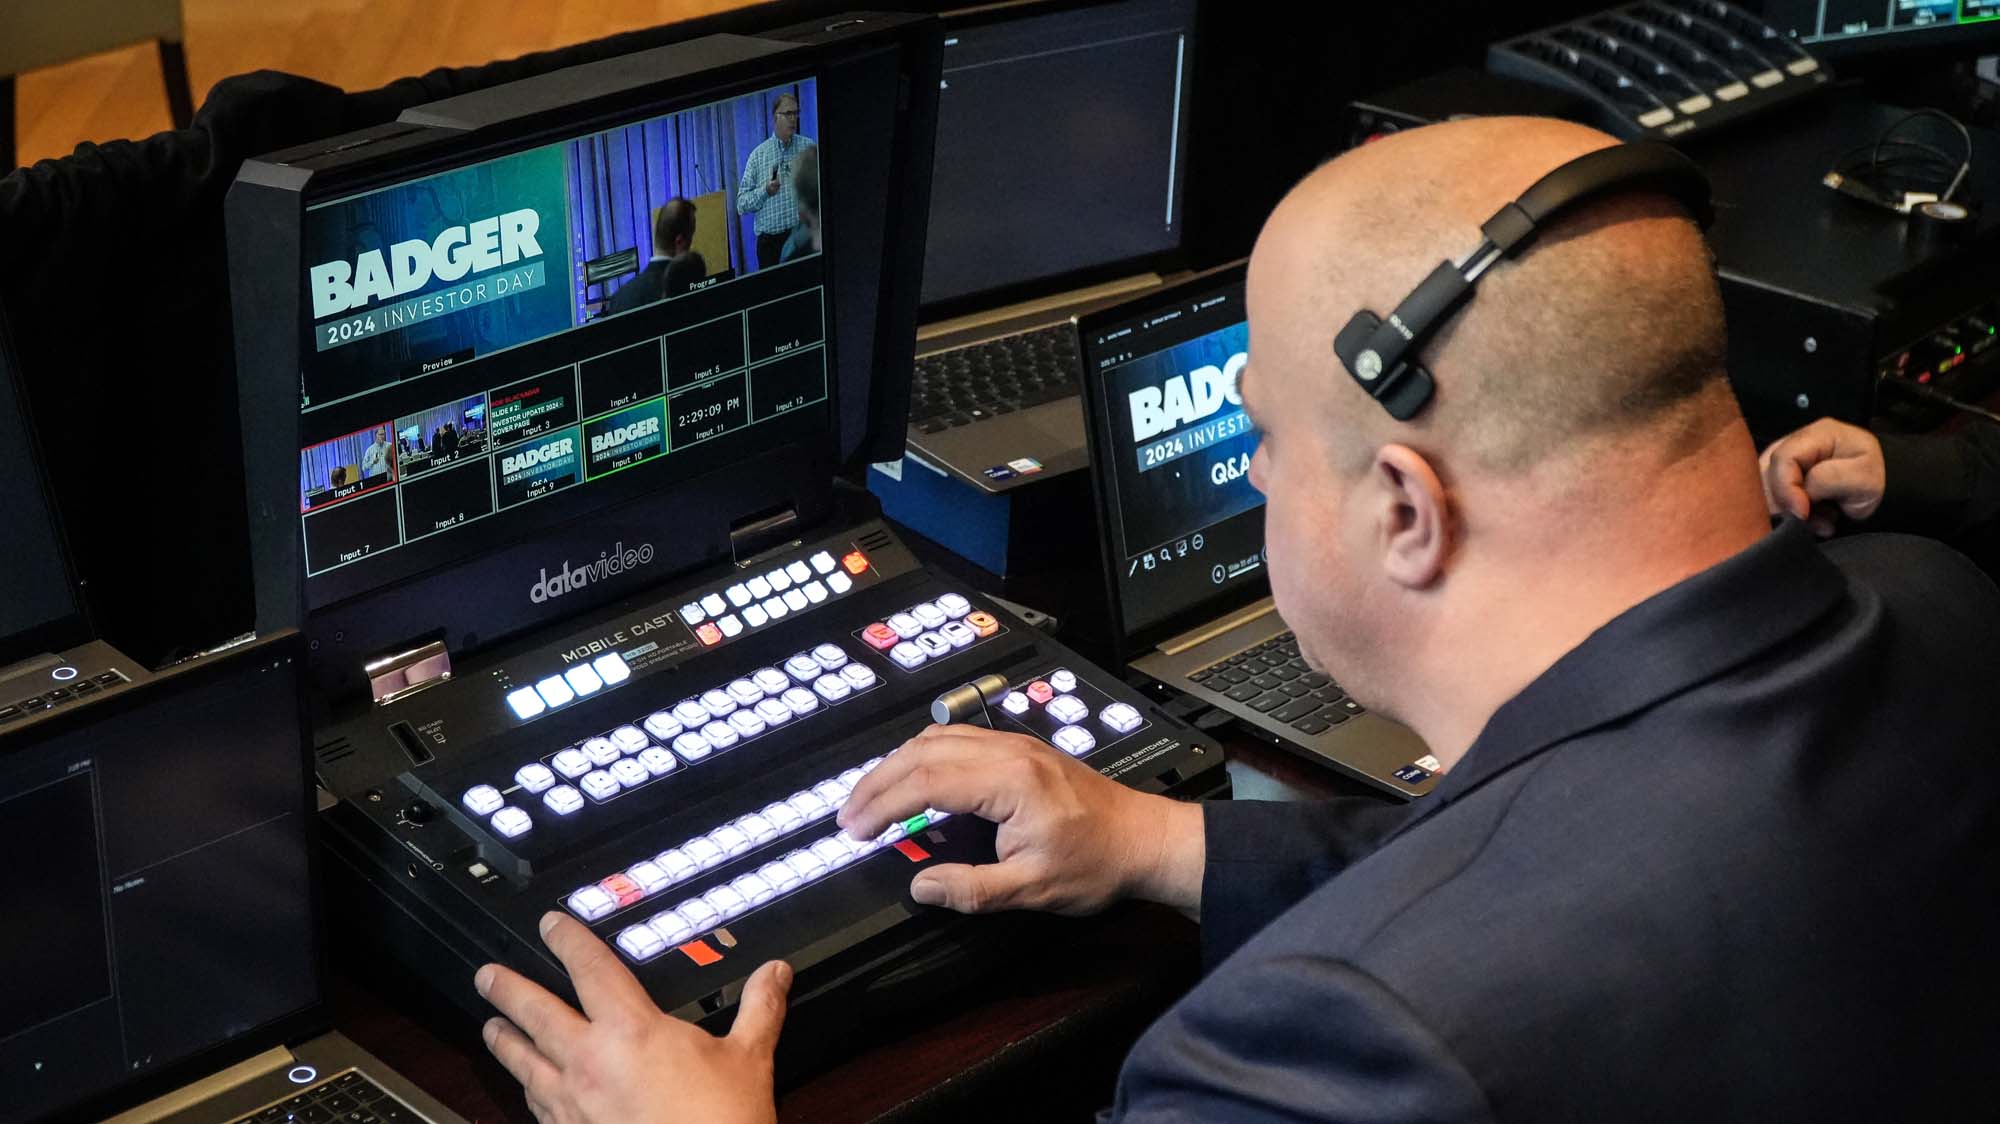 Image of producer Leslie Fultz operating the switcher at Badger's Investor Day event production.